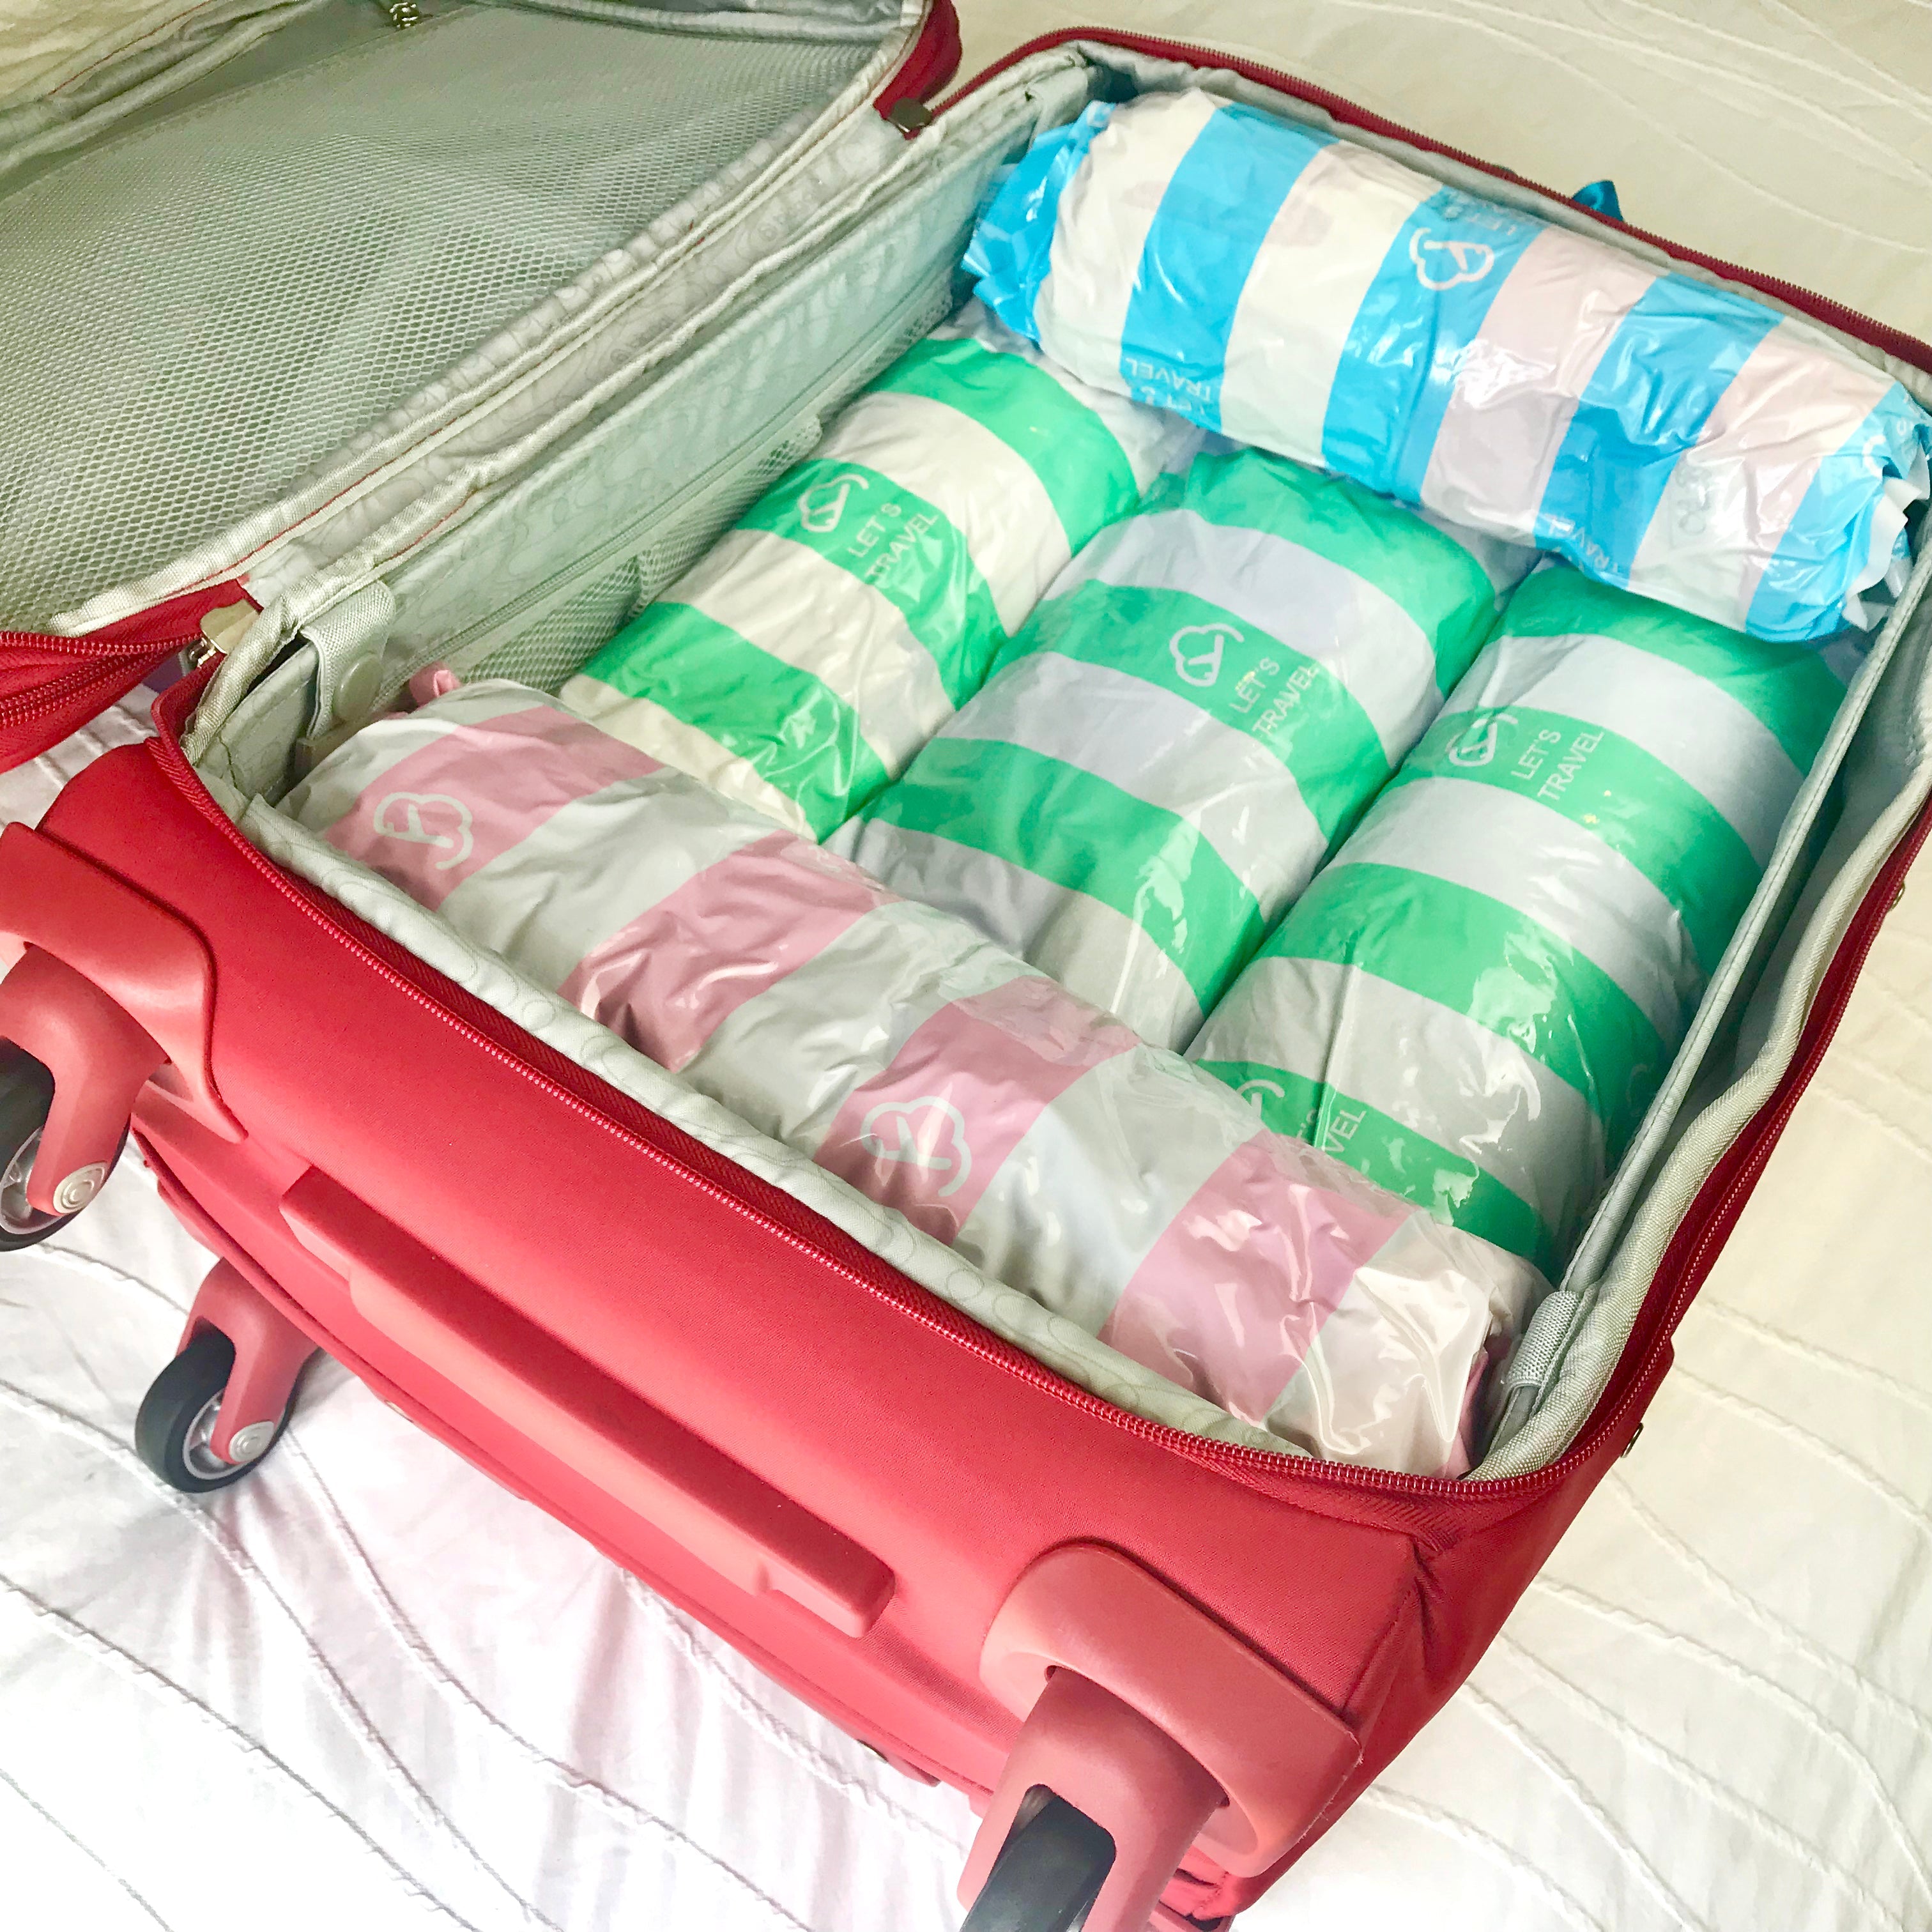 Compression Bags for Travel, Flat Packs